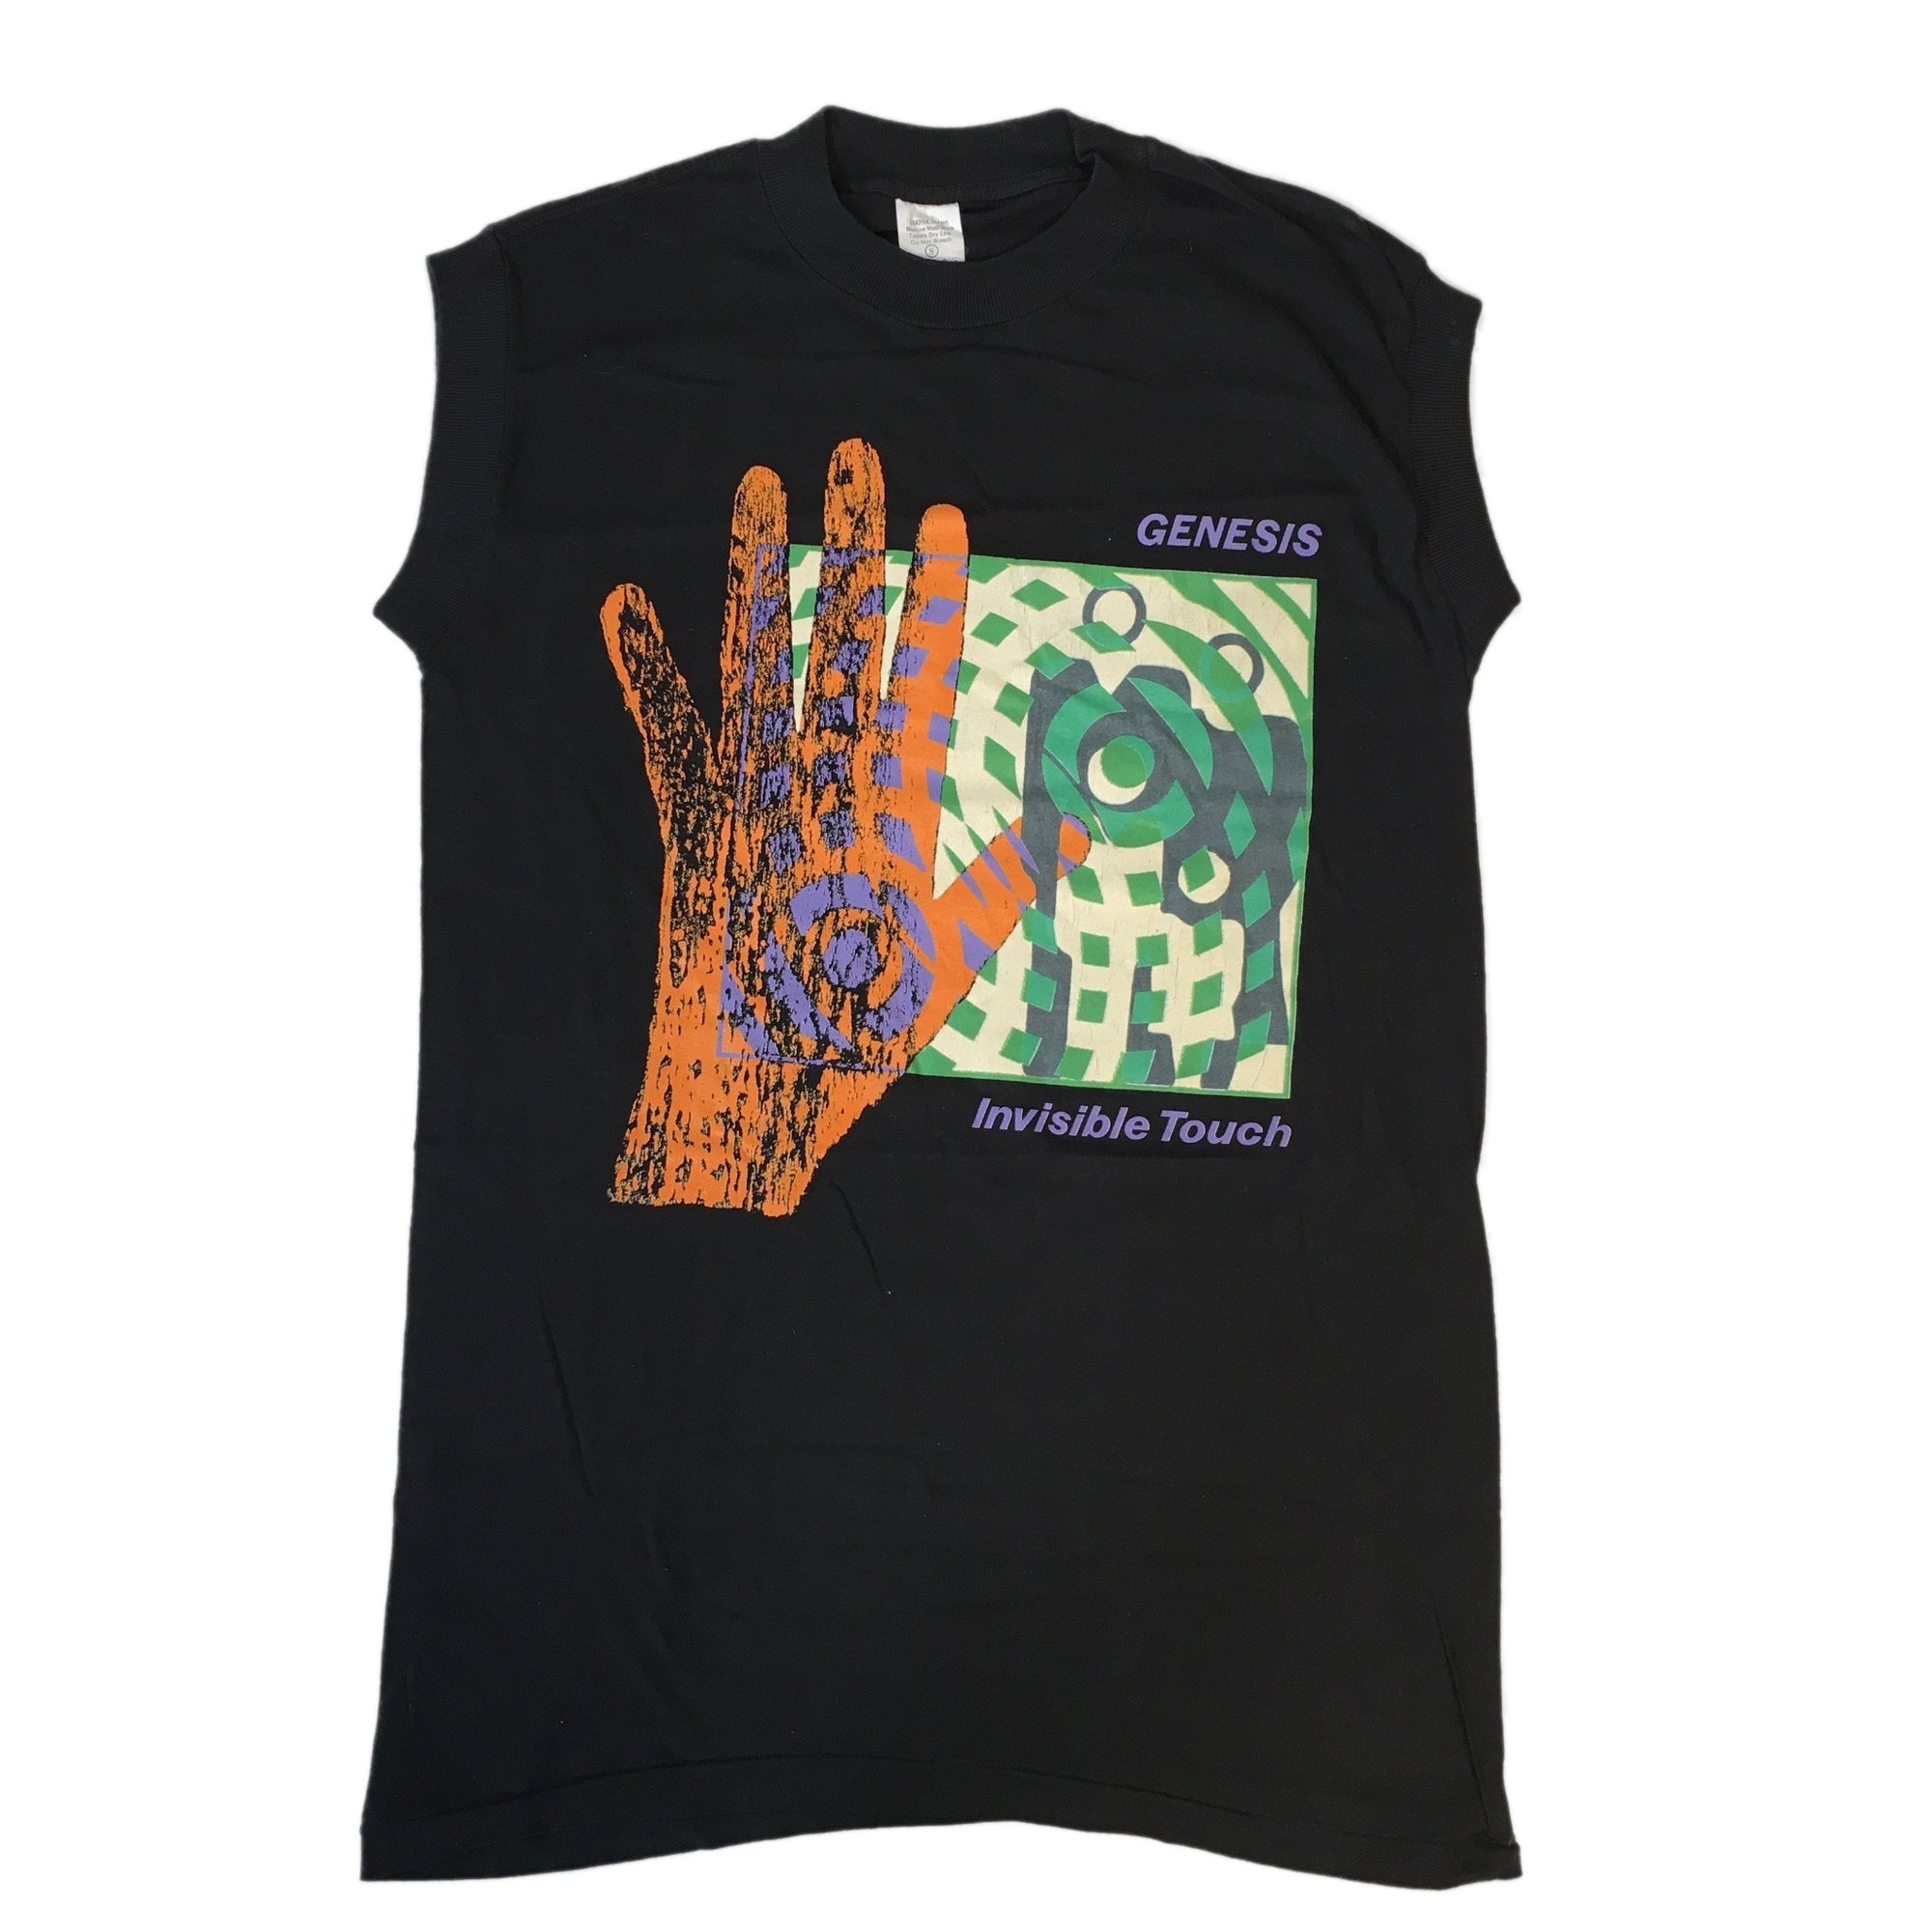 Vintage Genesis "Invisible Touch" Sleeveless T-Shirt - jointcustodydc